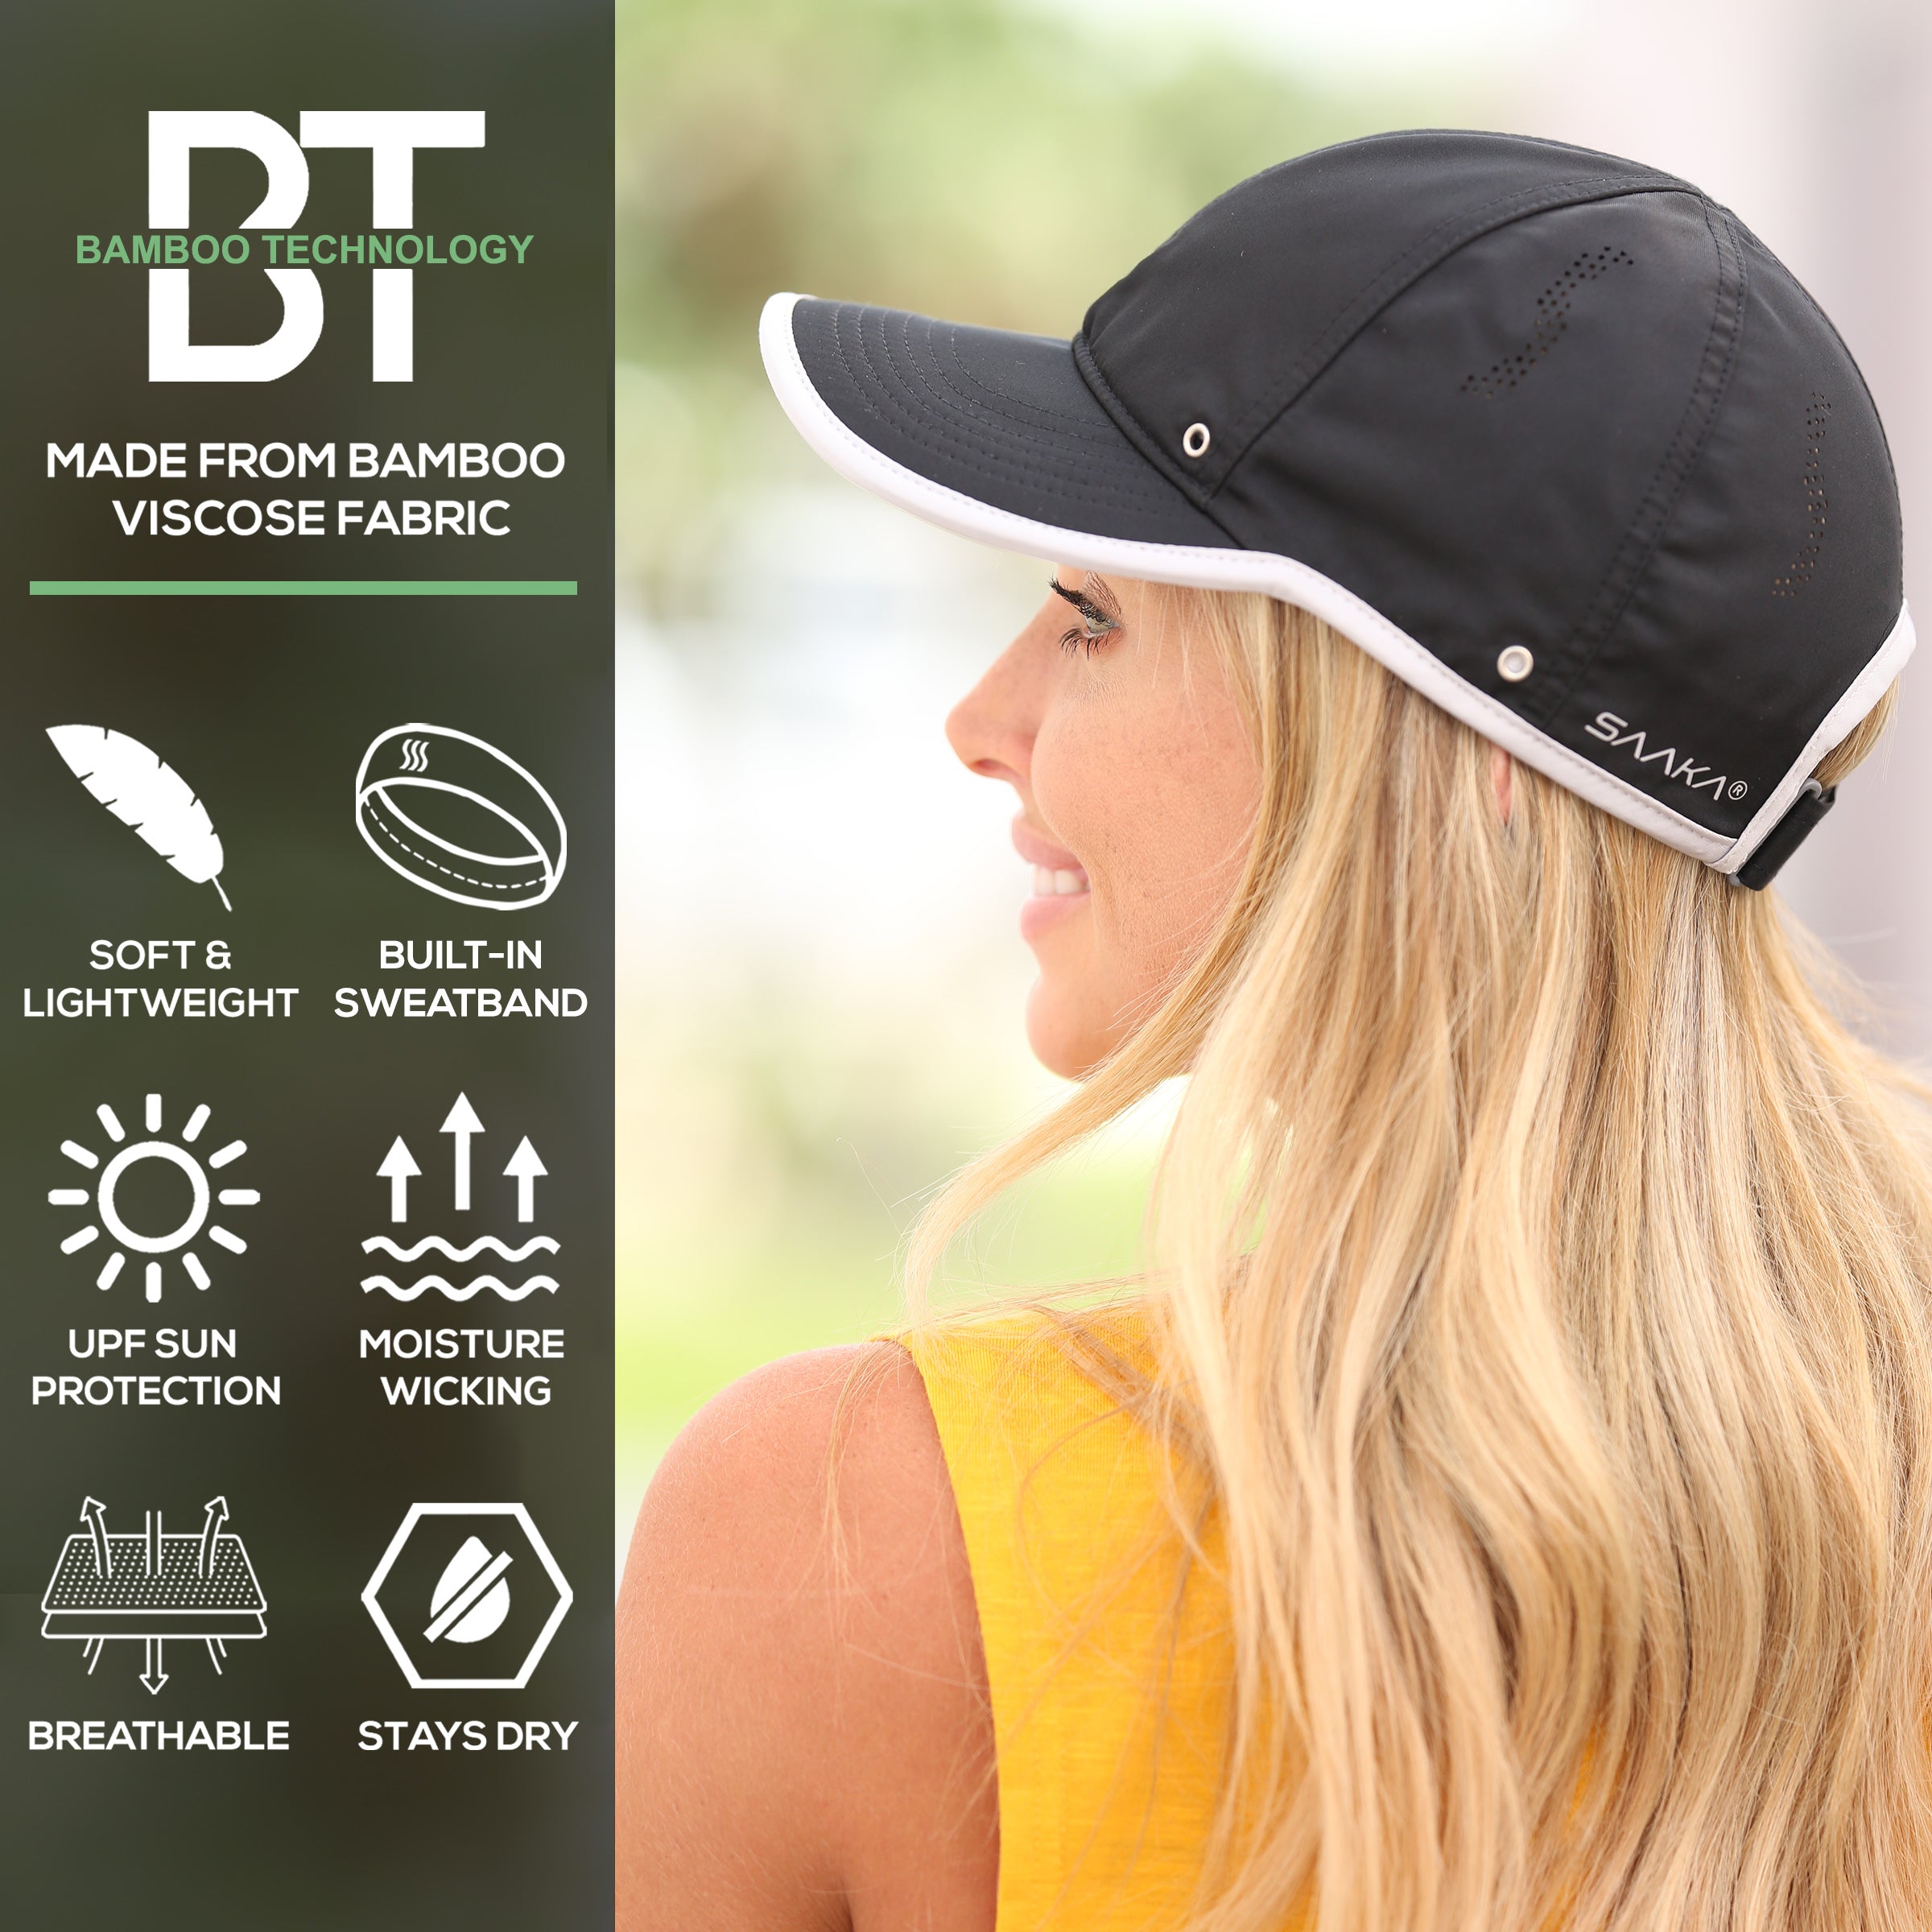 Sports Hats | Hats for Running, Tennis, Gym & Golf